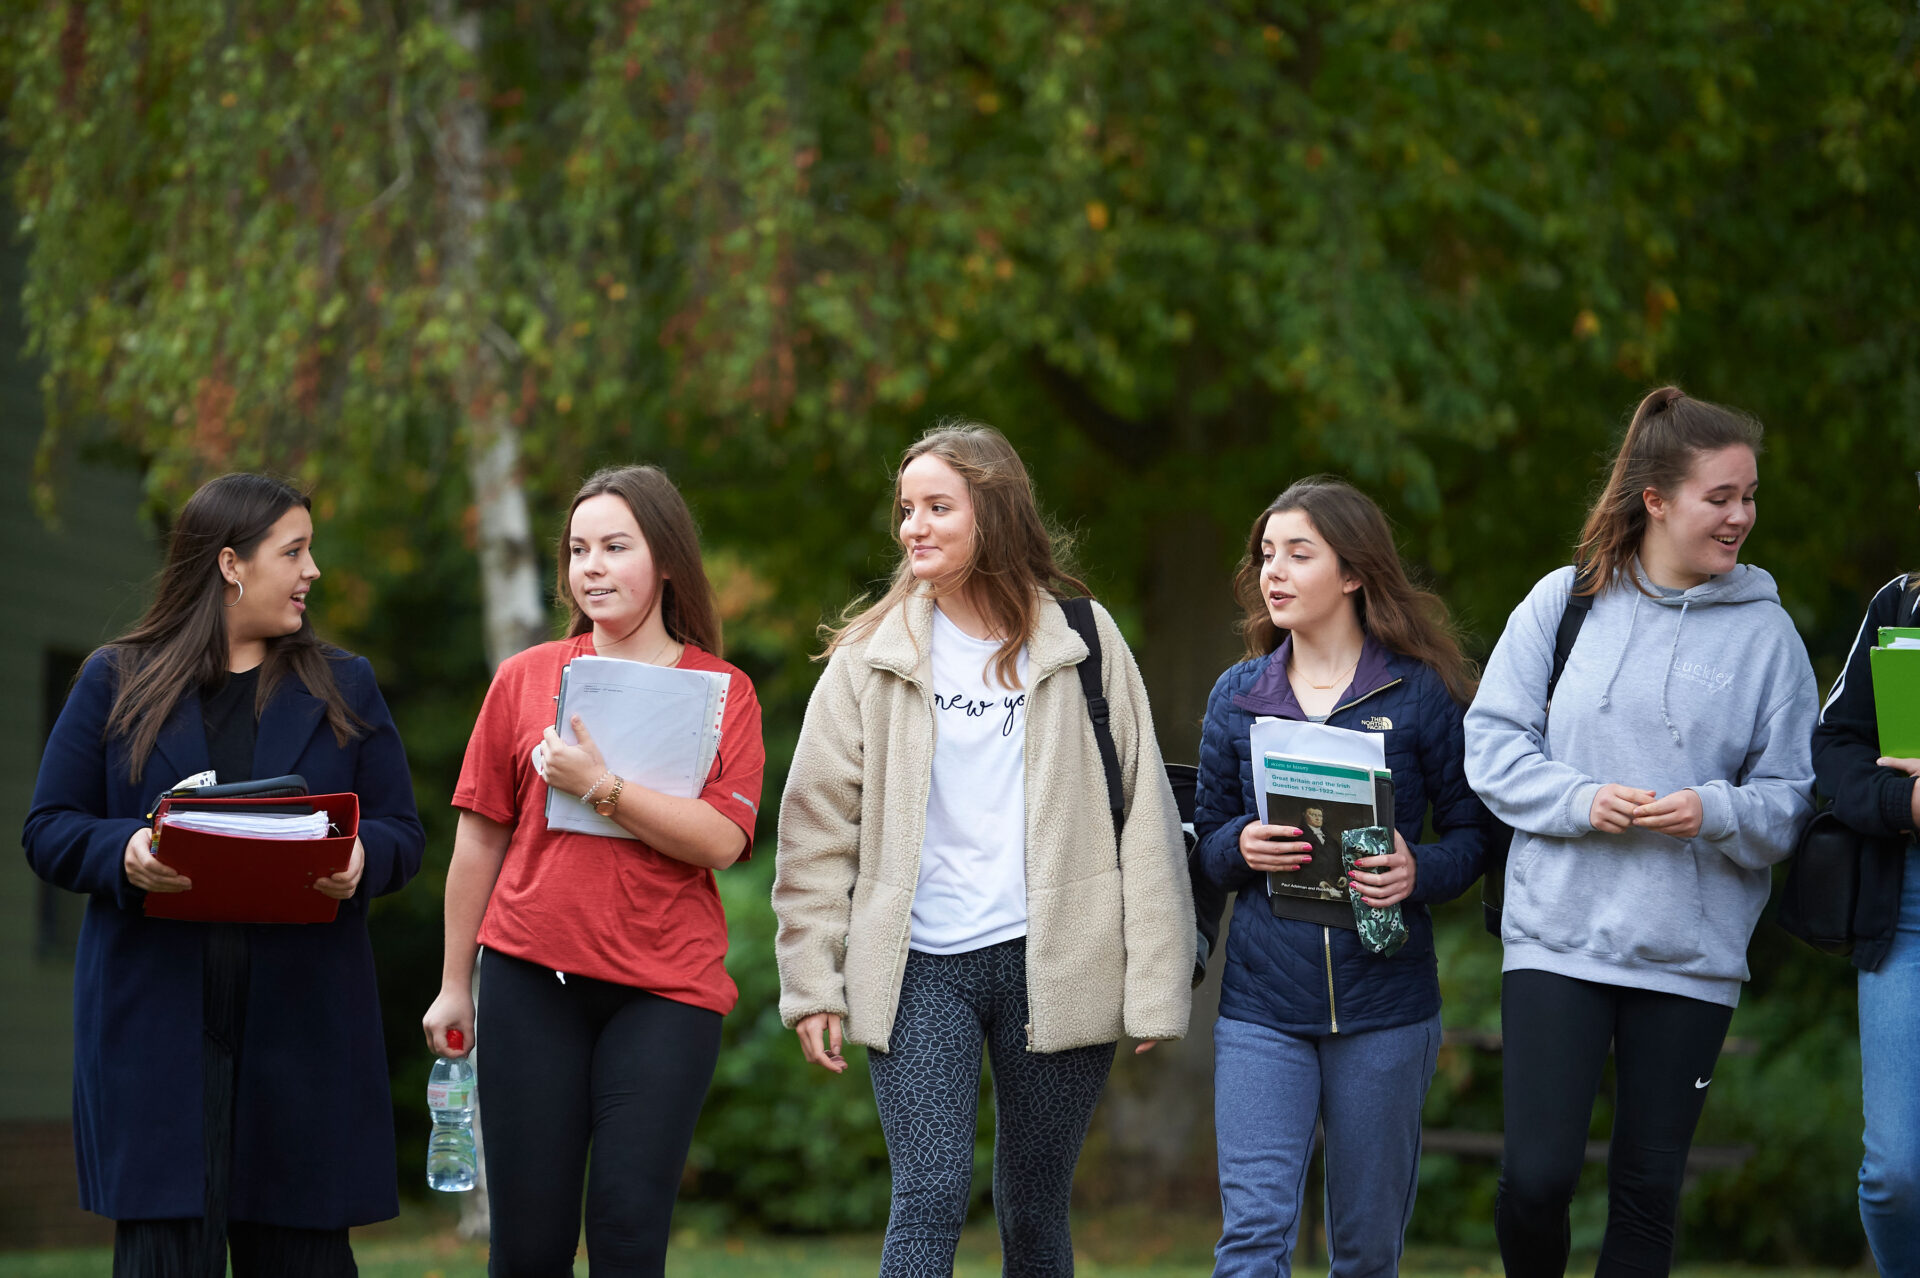 group of students together walking